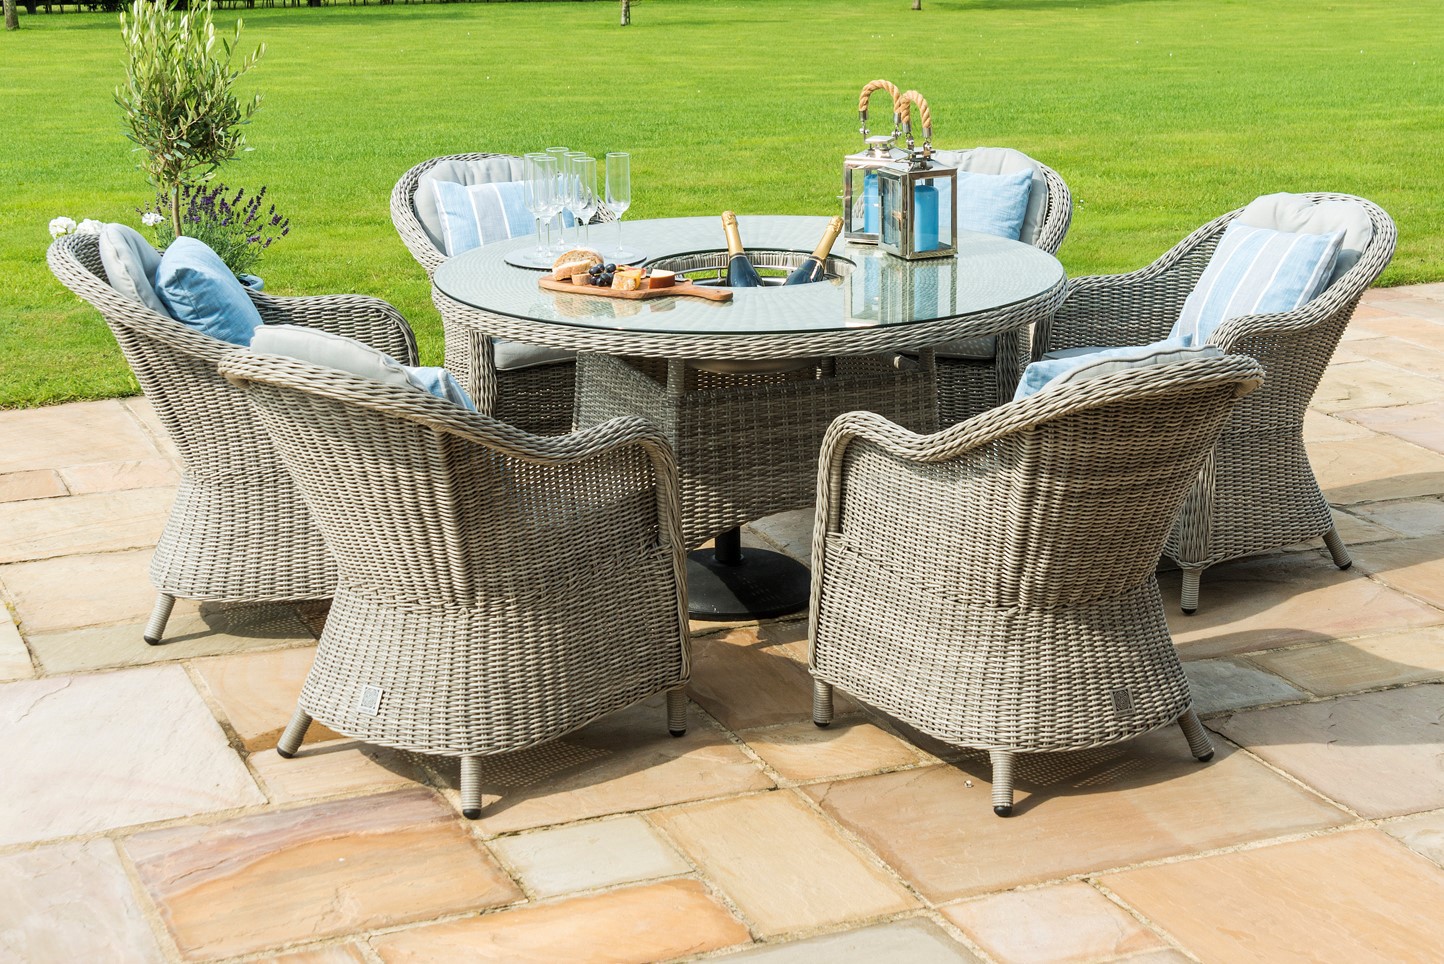 How To Buy Good Quality Rattan Outdoor Furniture - AtoAllinks